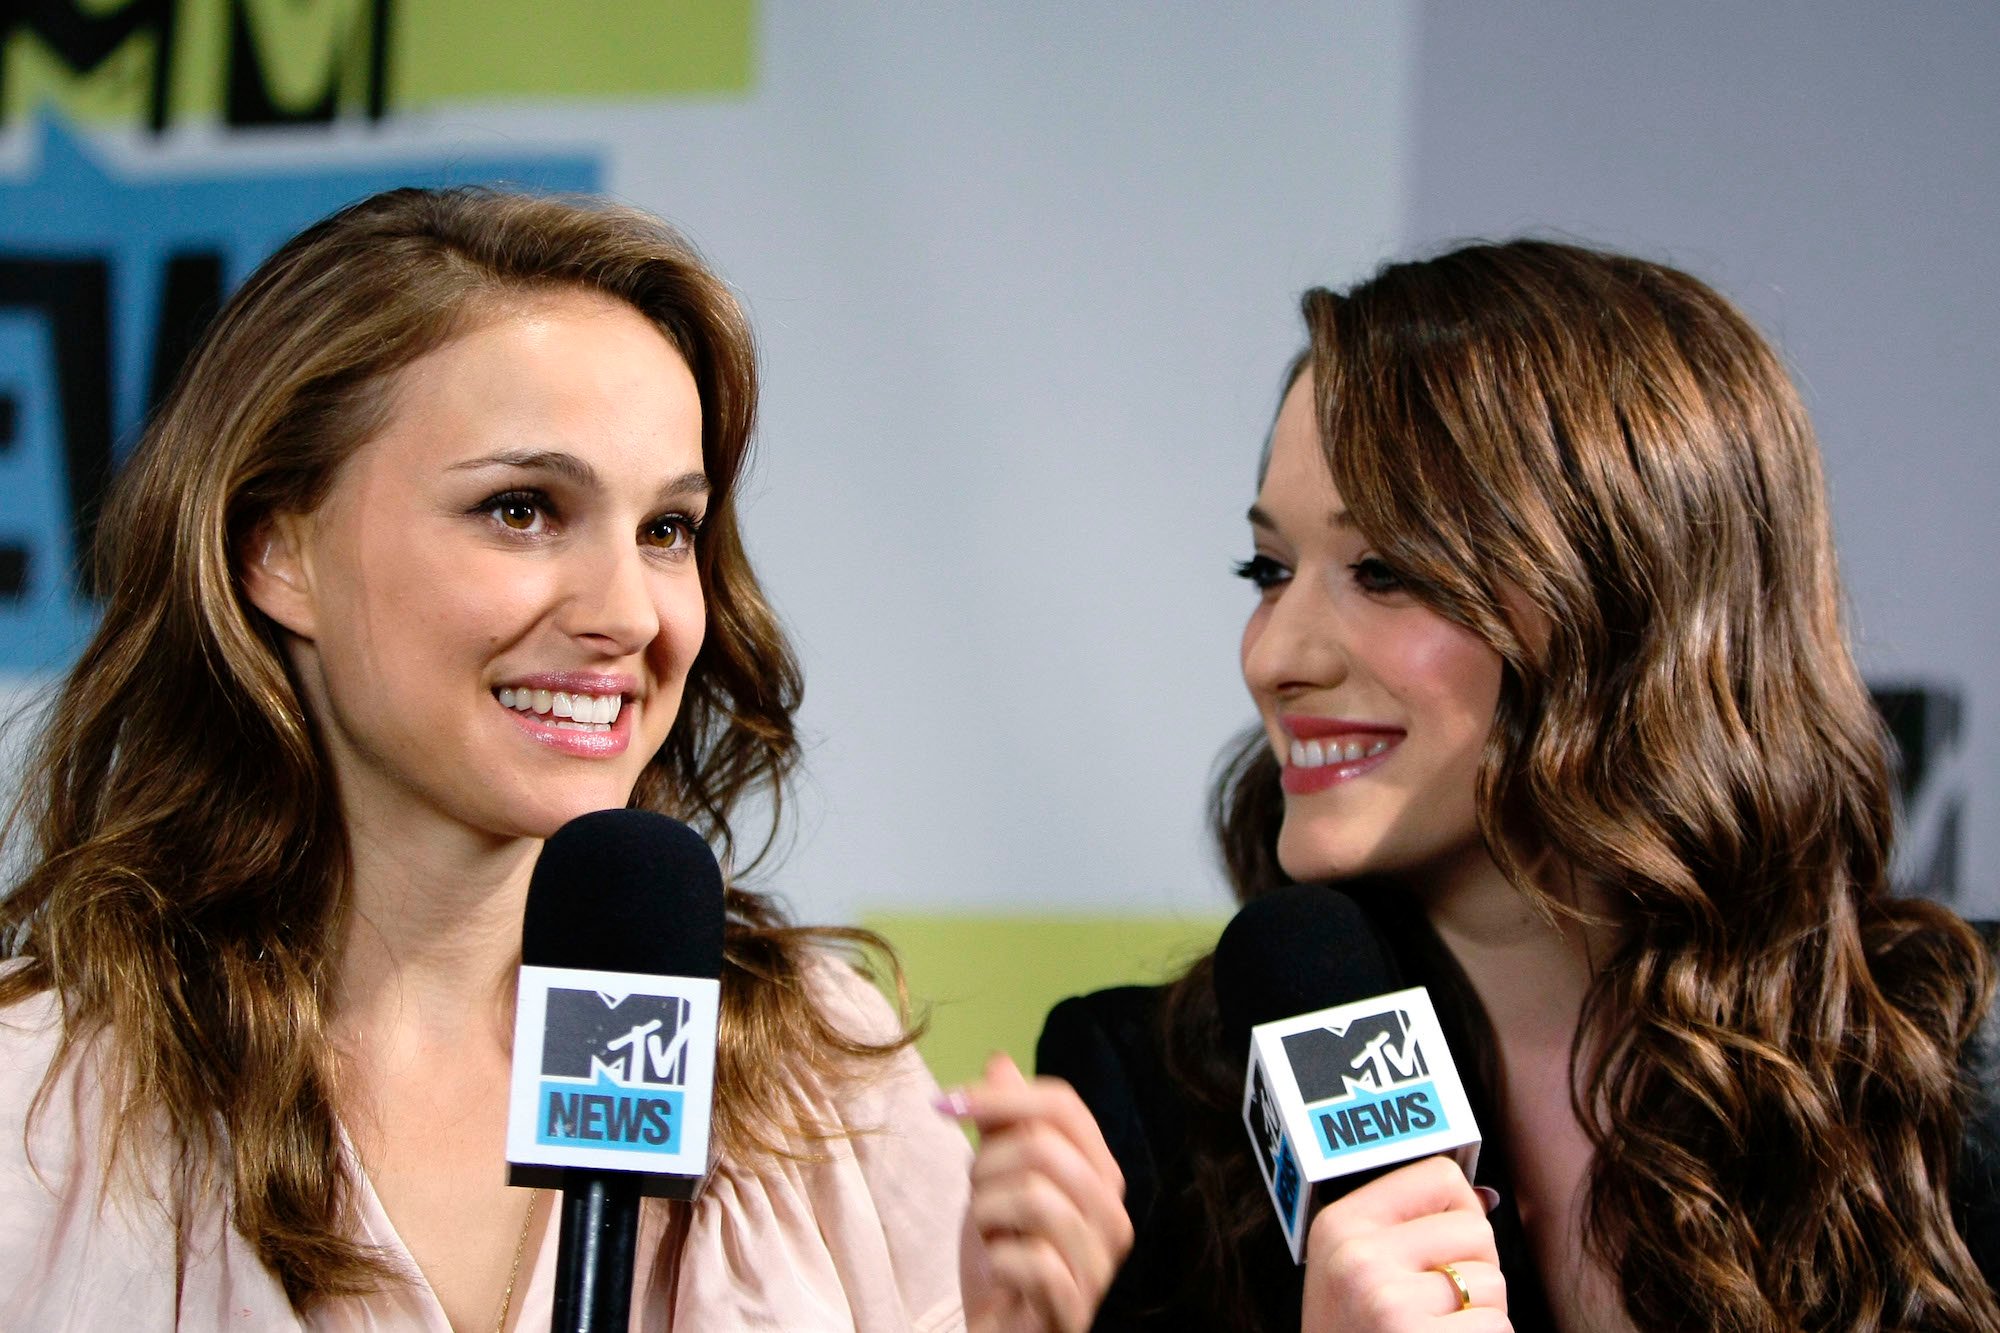 Natalie Portman and Kat Dennings at San Diego Comic-Con 2010 on July 24, 2010